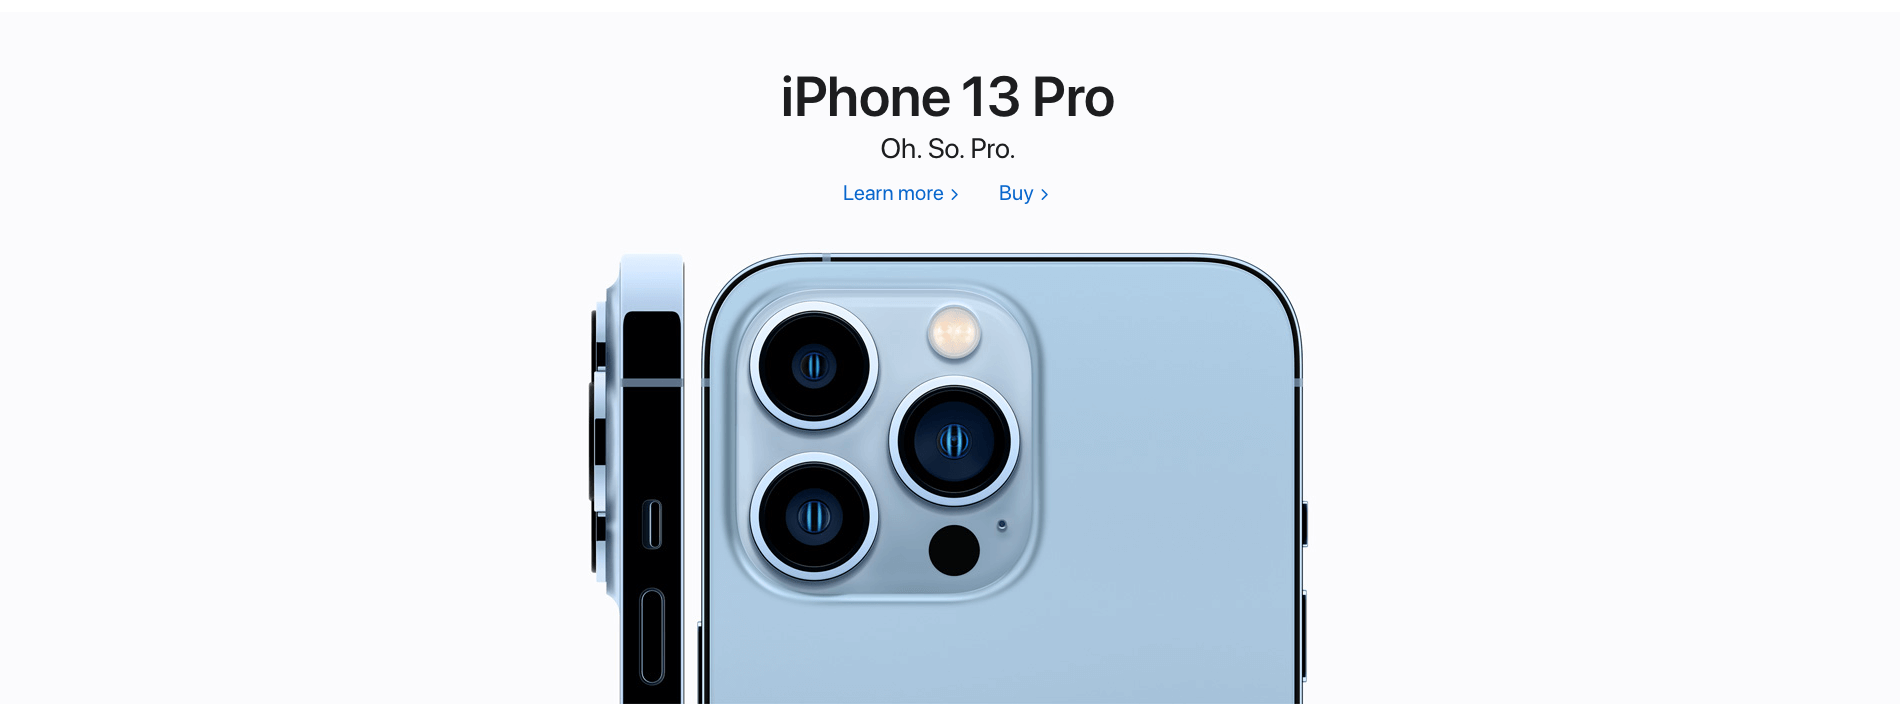 A minimalistic image of the iPhone 13 Pro on a white background with the phrase "Oh. So. Pro"